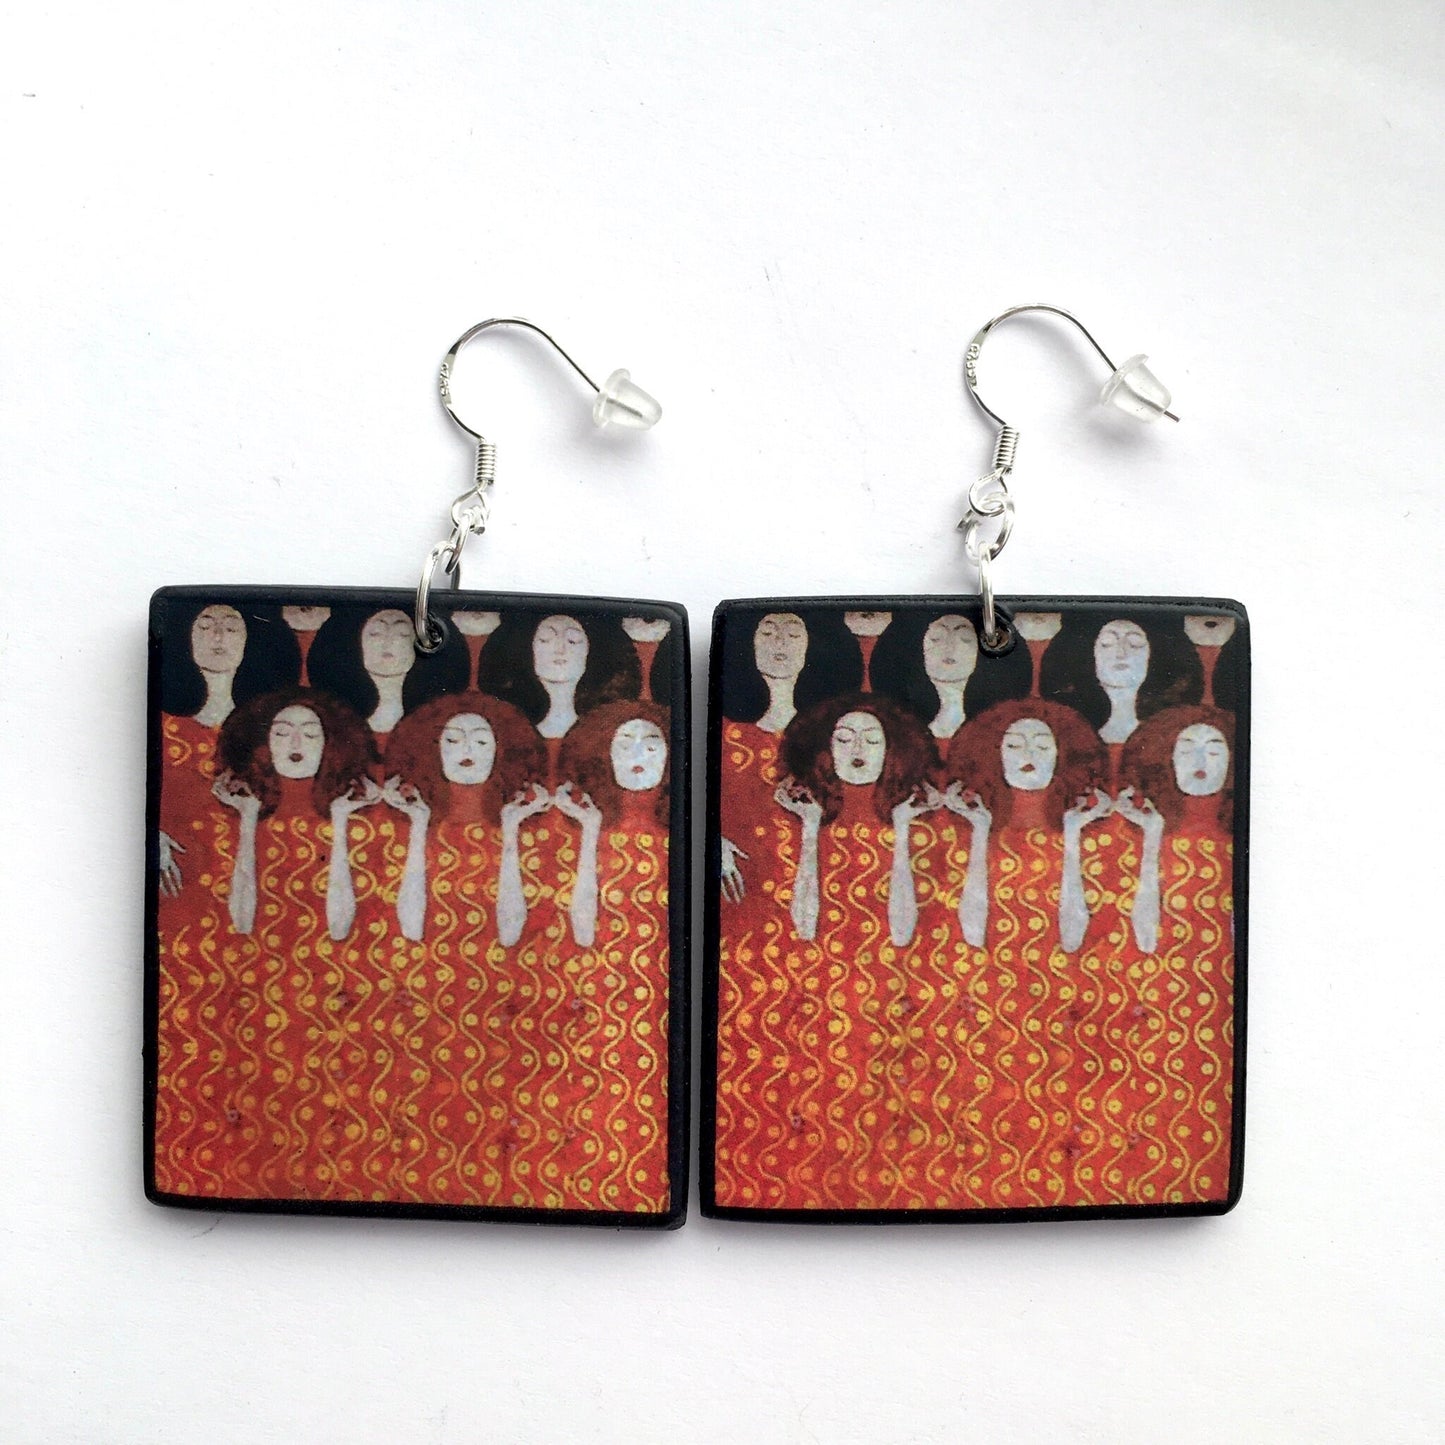 Aesthetic earrings inspired by painting "Beethoven Frieze" which was based on Wagner's interpretation of Beethoven's Ninth Symphony.  Obljewellery artsy gift shop.